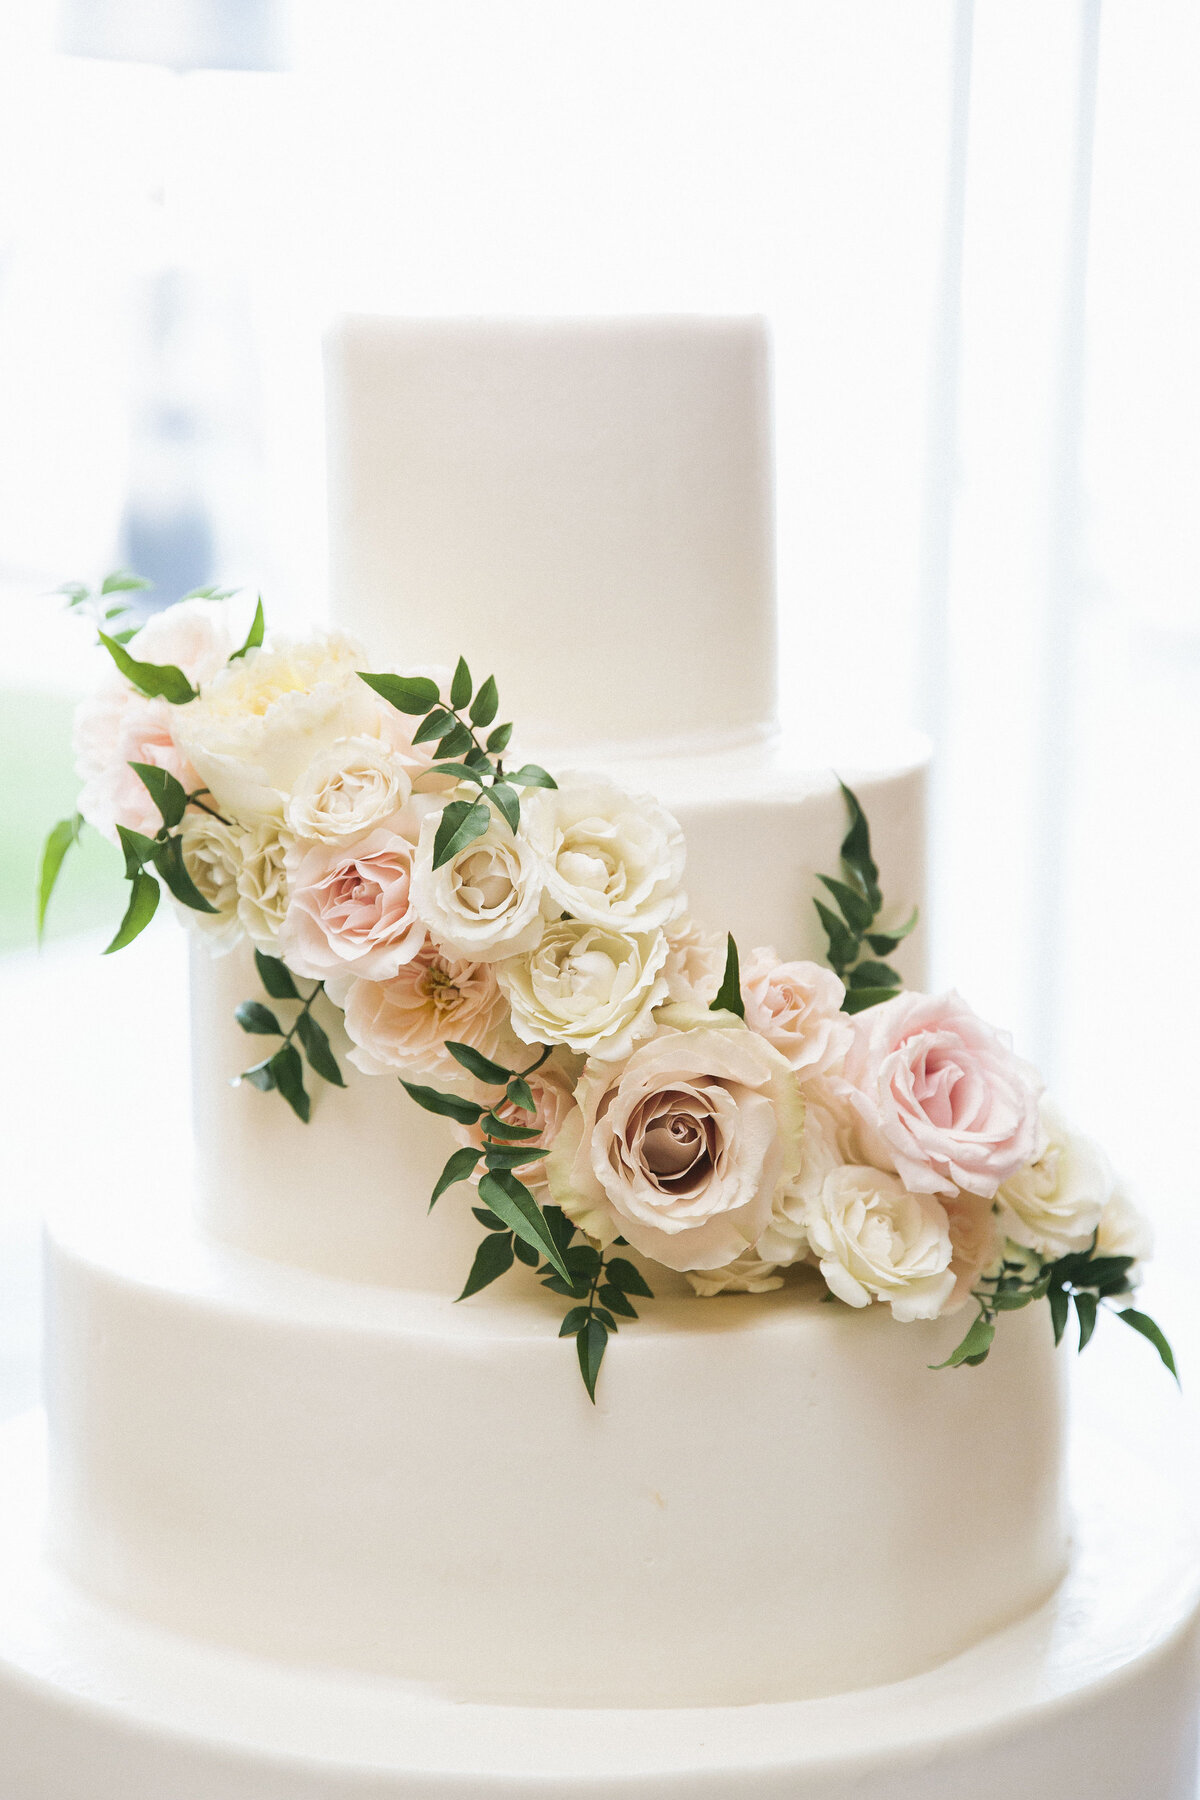 Wedding cake with florals on the tiers by Montilio's bakery